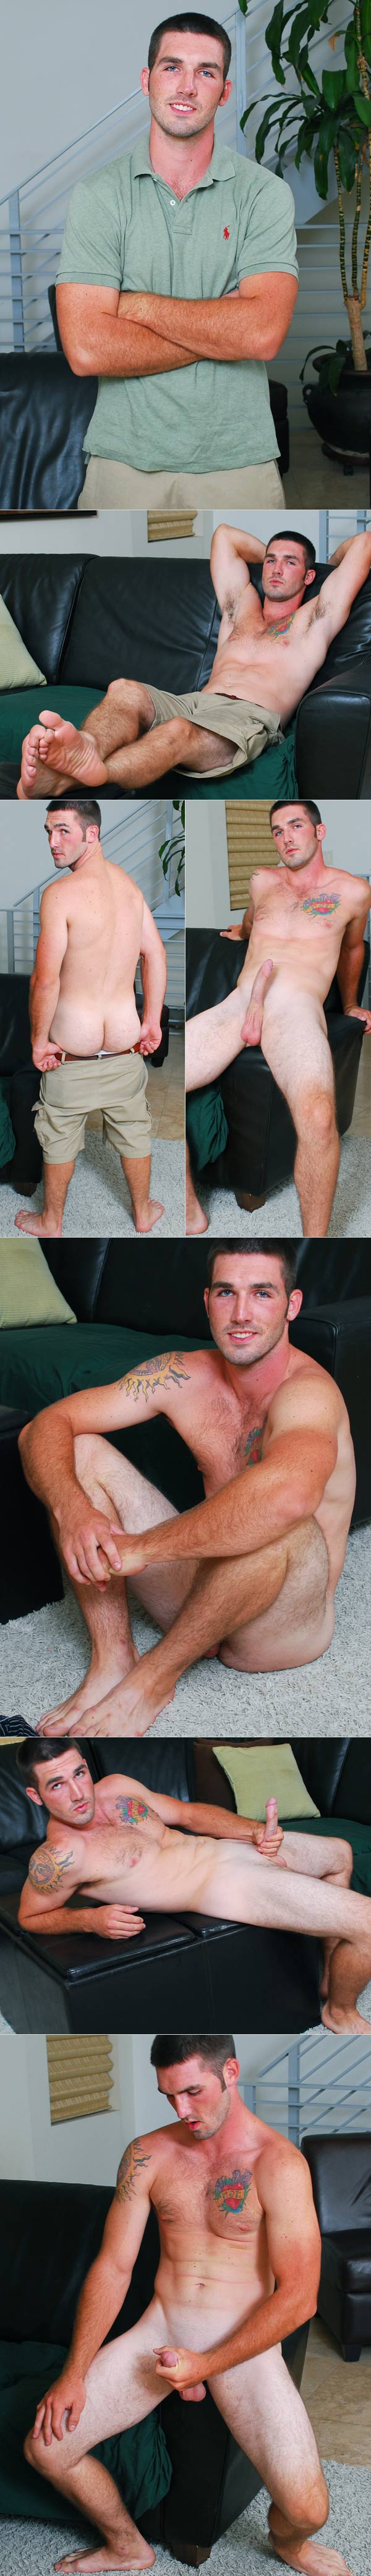 Brad Campbell (Busts A Nut) at CollegeDudes.com